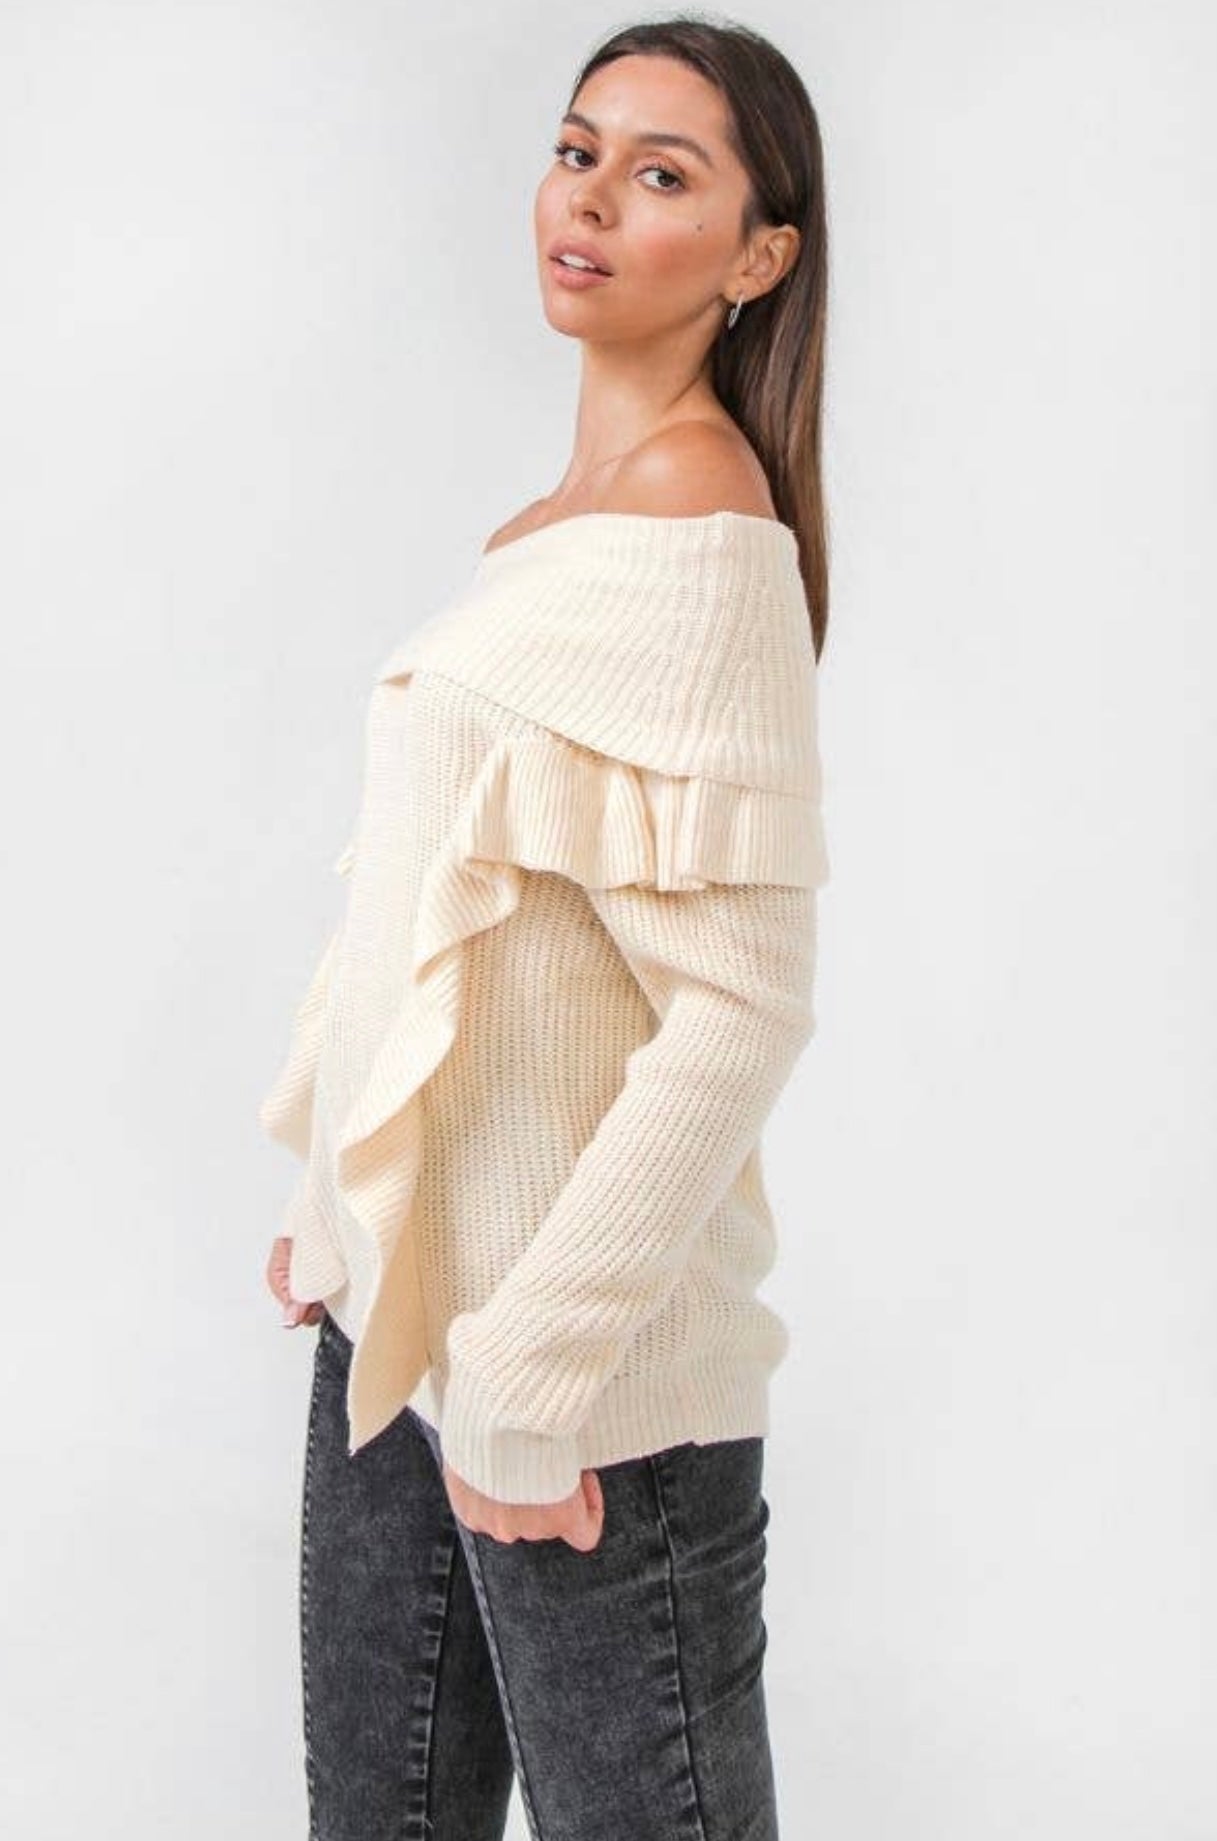 Off the shoulder knit sweater with ruffled accents.  cream in color